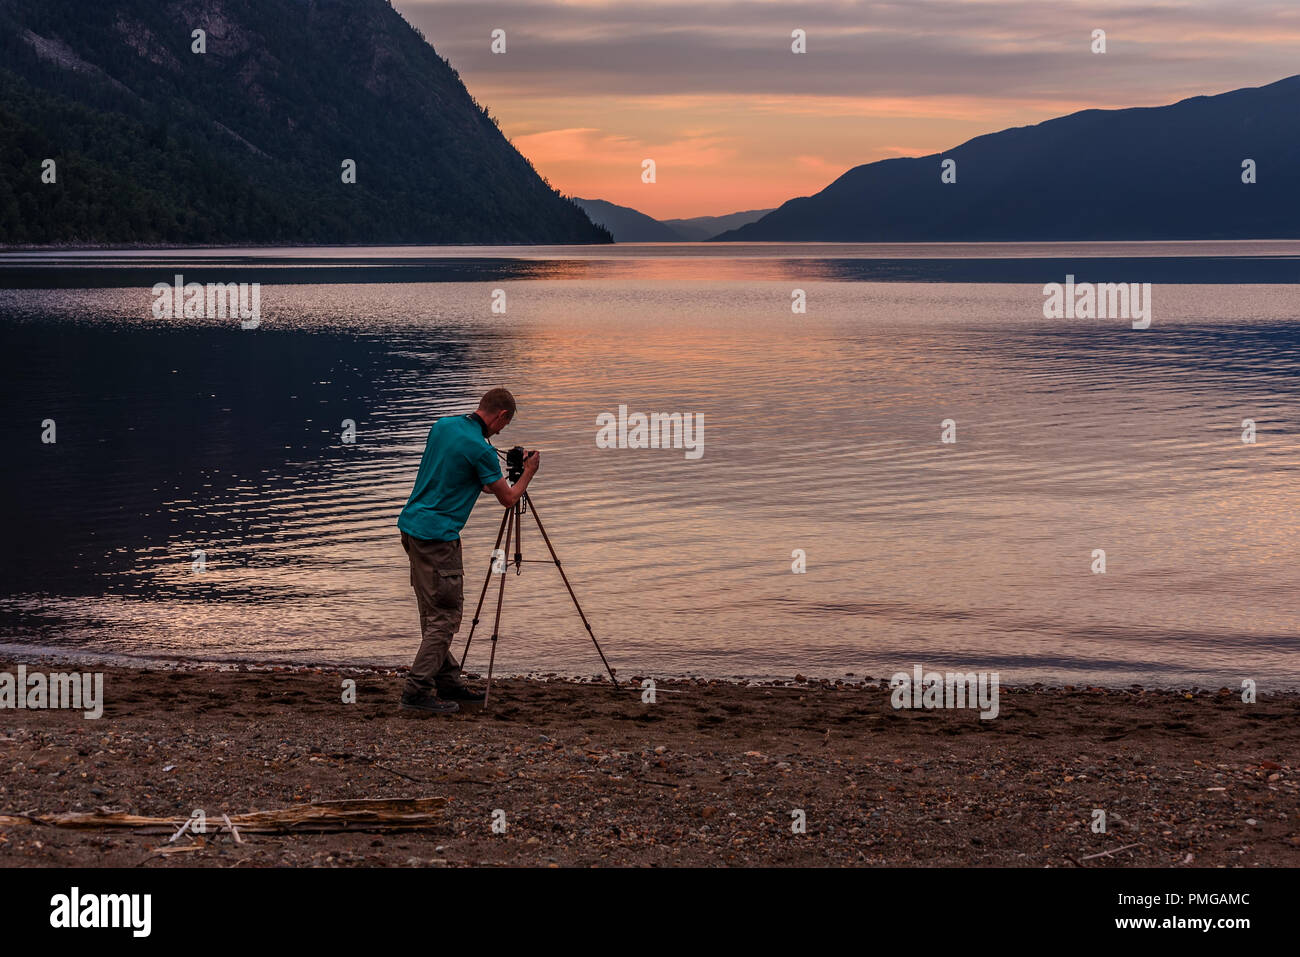 The photographer shoots a beautiful pink sunset over the lake and mountains Stock Photo